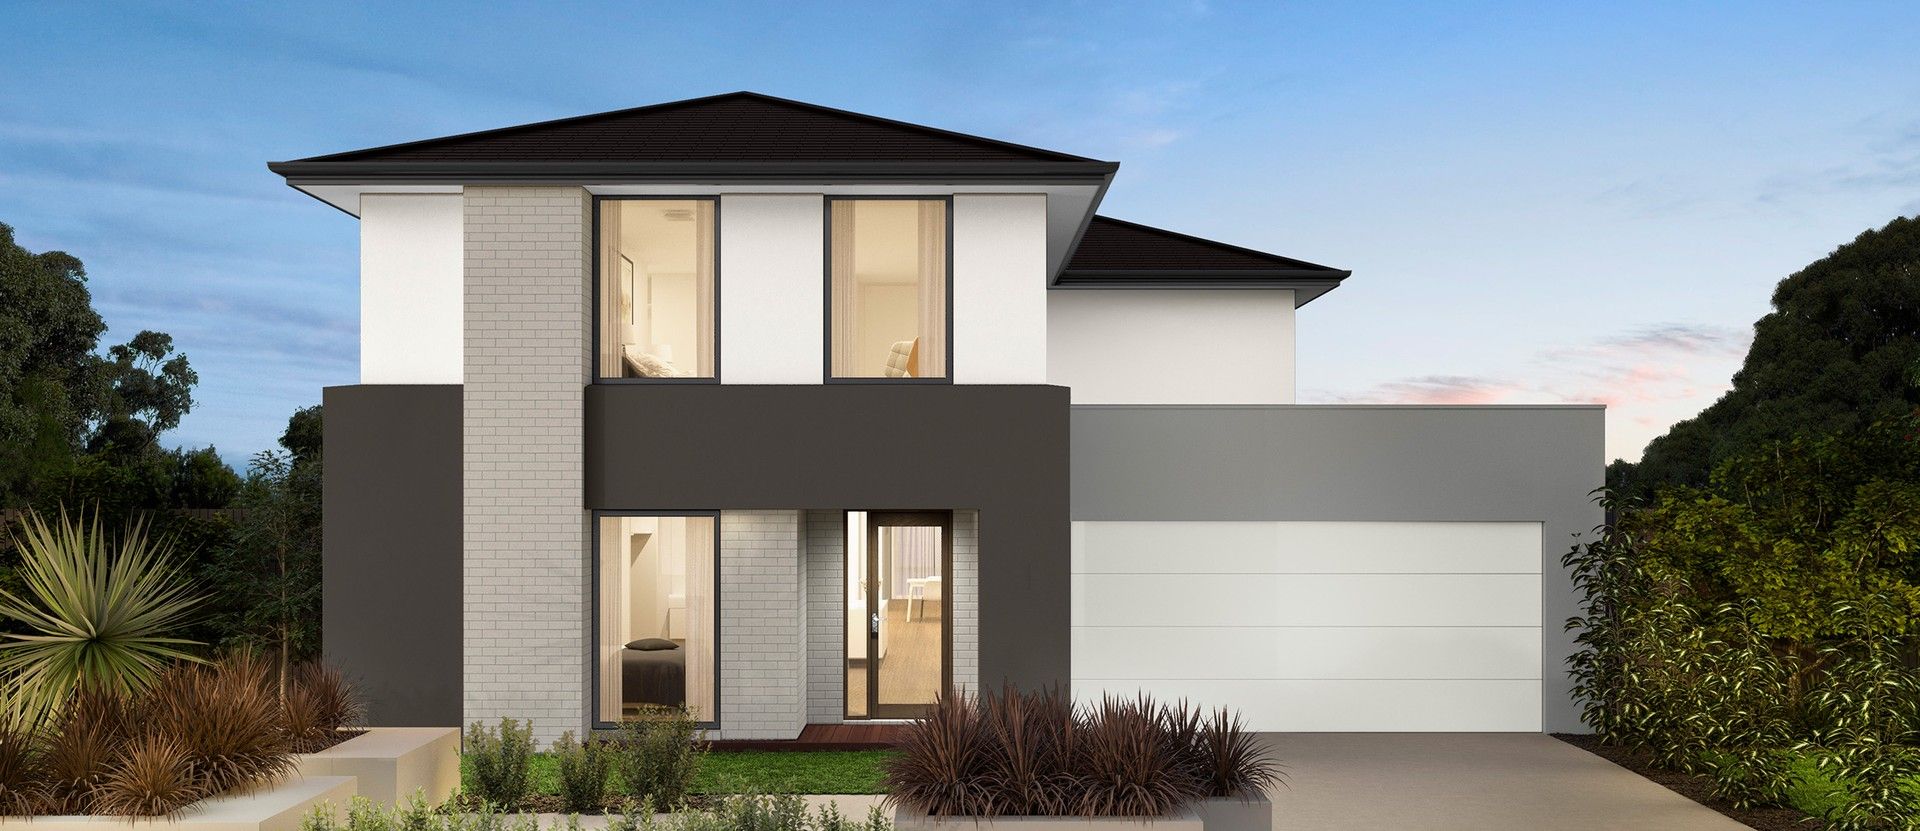 Sinopia Street, Lot: 2405, Clyde North VIC 3978, Image 0